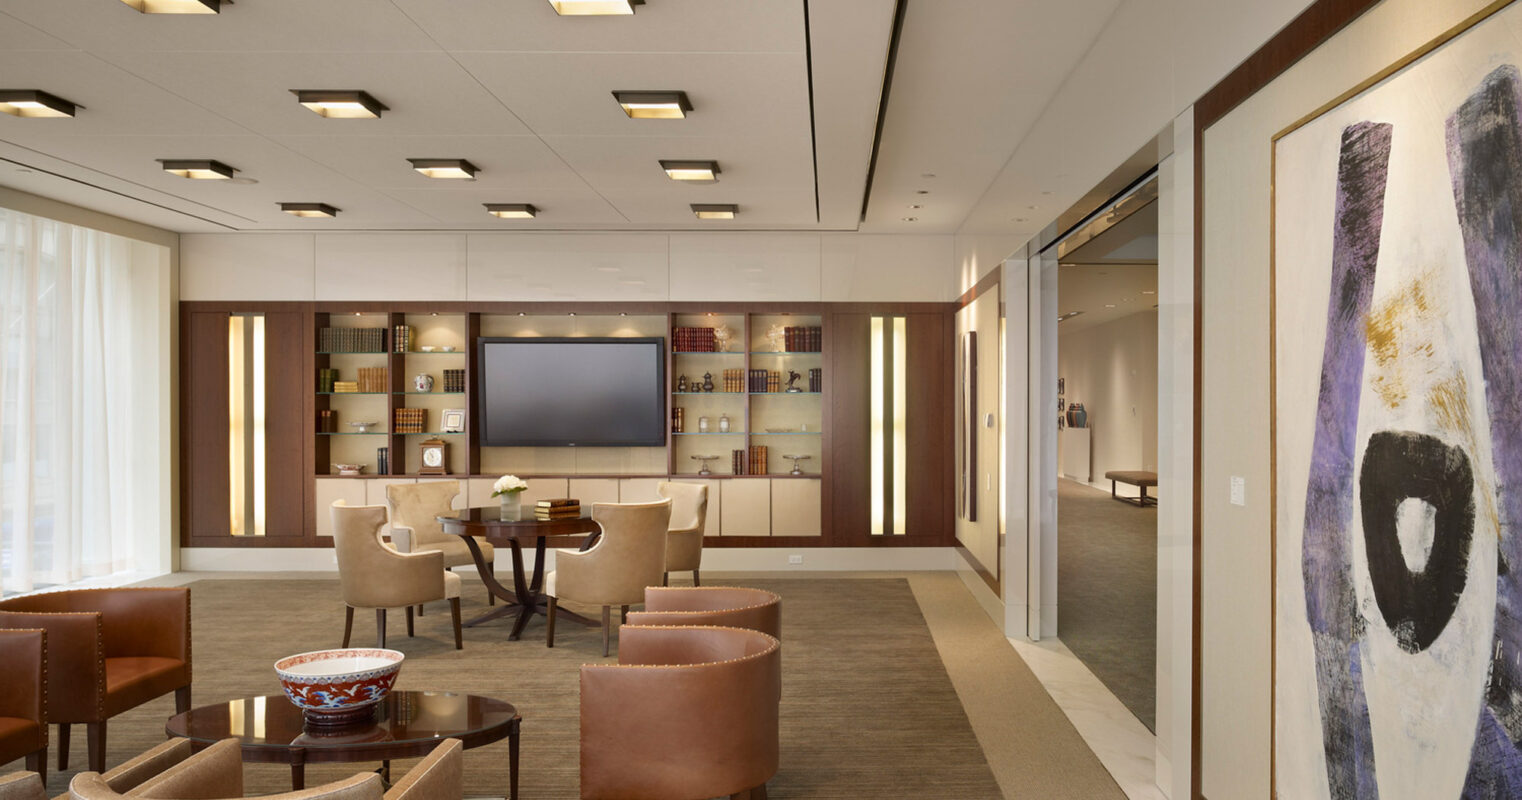 Contemporary office lounge with neutral tones, featuring armchairs around a central coffee table, recessed lighting in a grid pattern, and an abstract wall painting complementing built-in shelving and glass partitions.